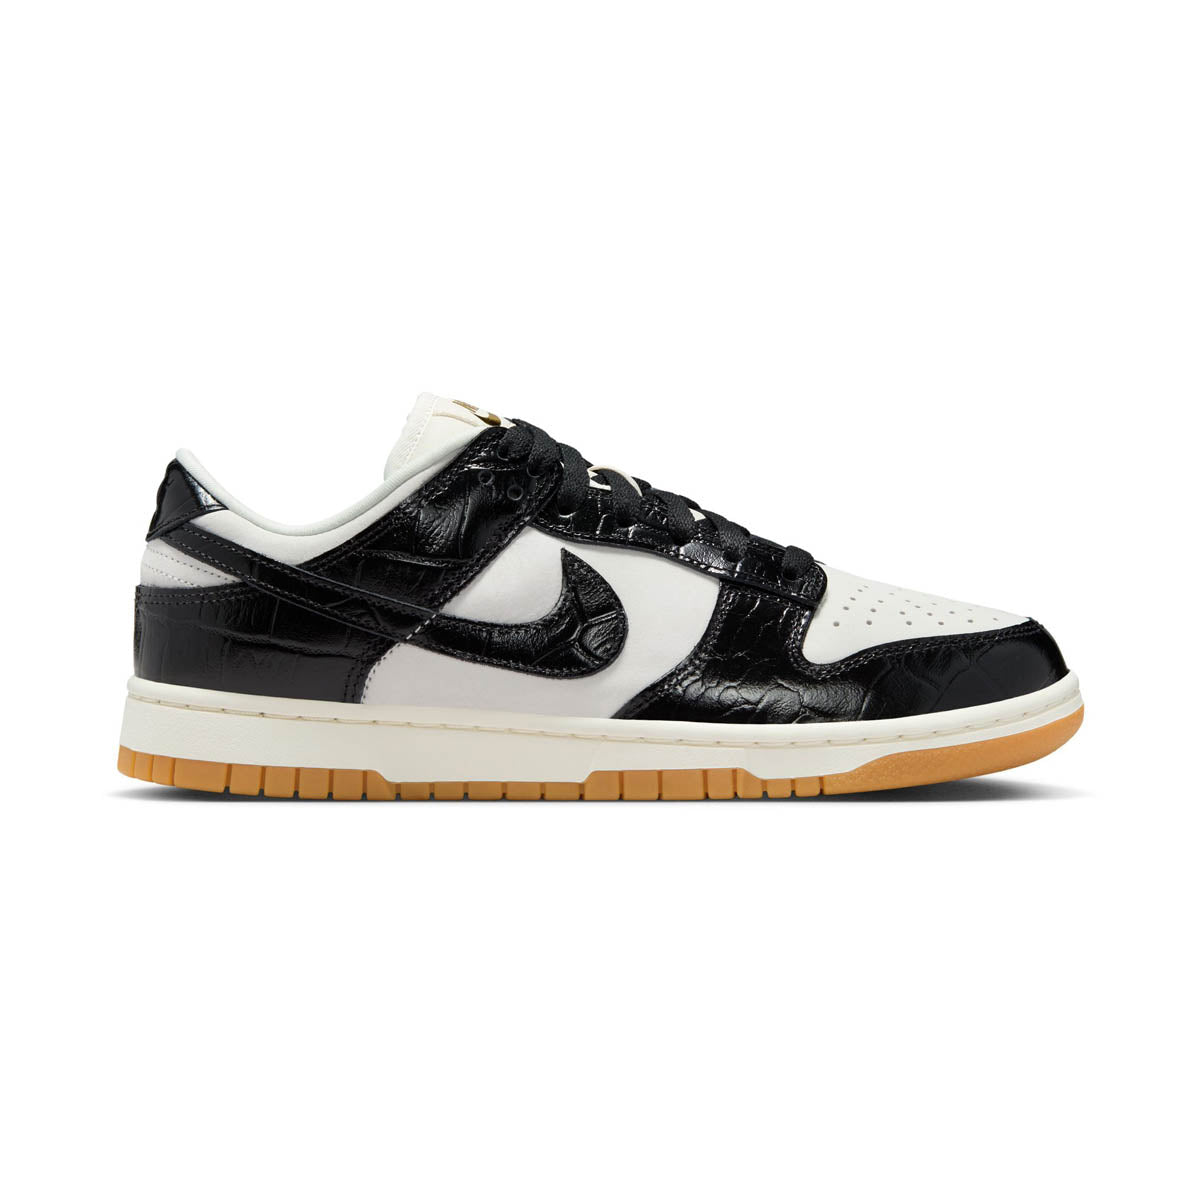 nike air force 1 low sail beige navy blue Women's Shoes